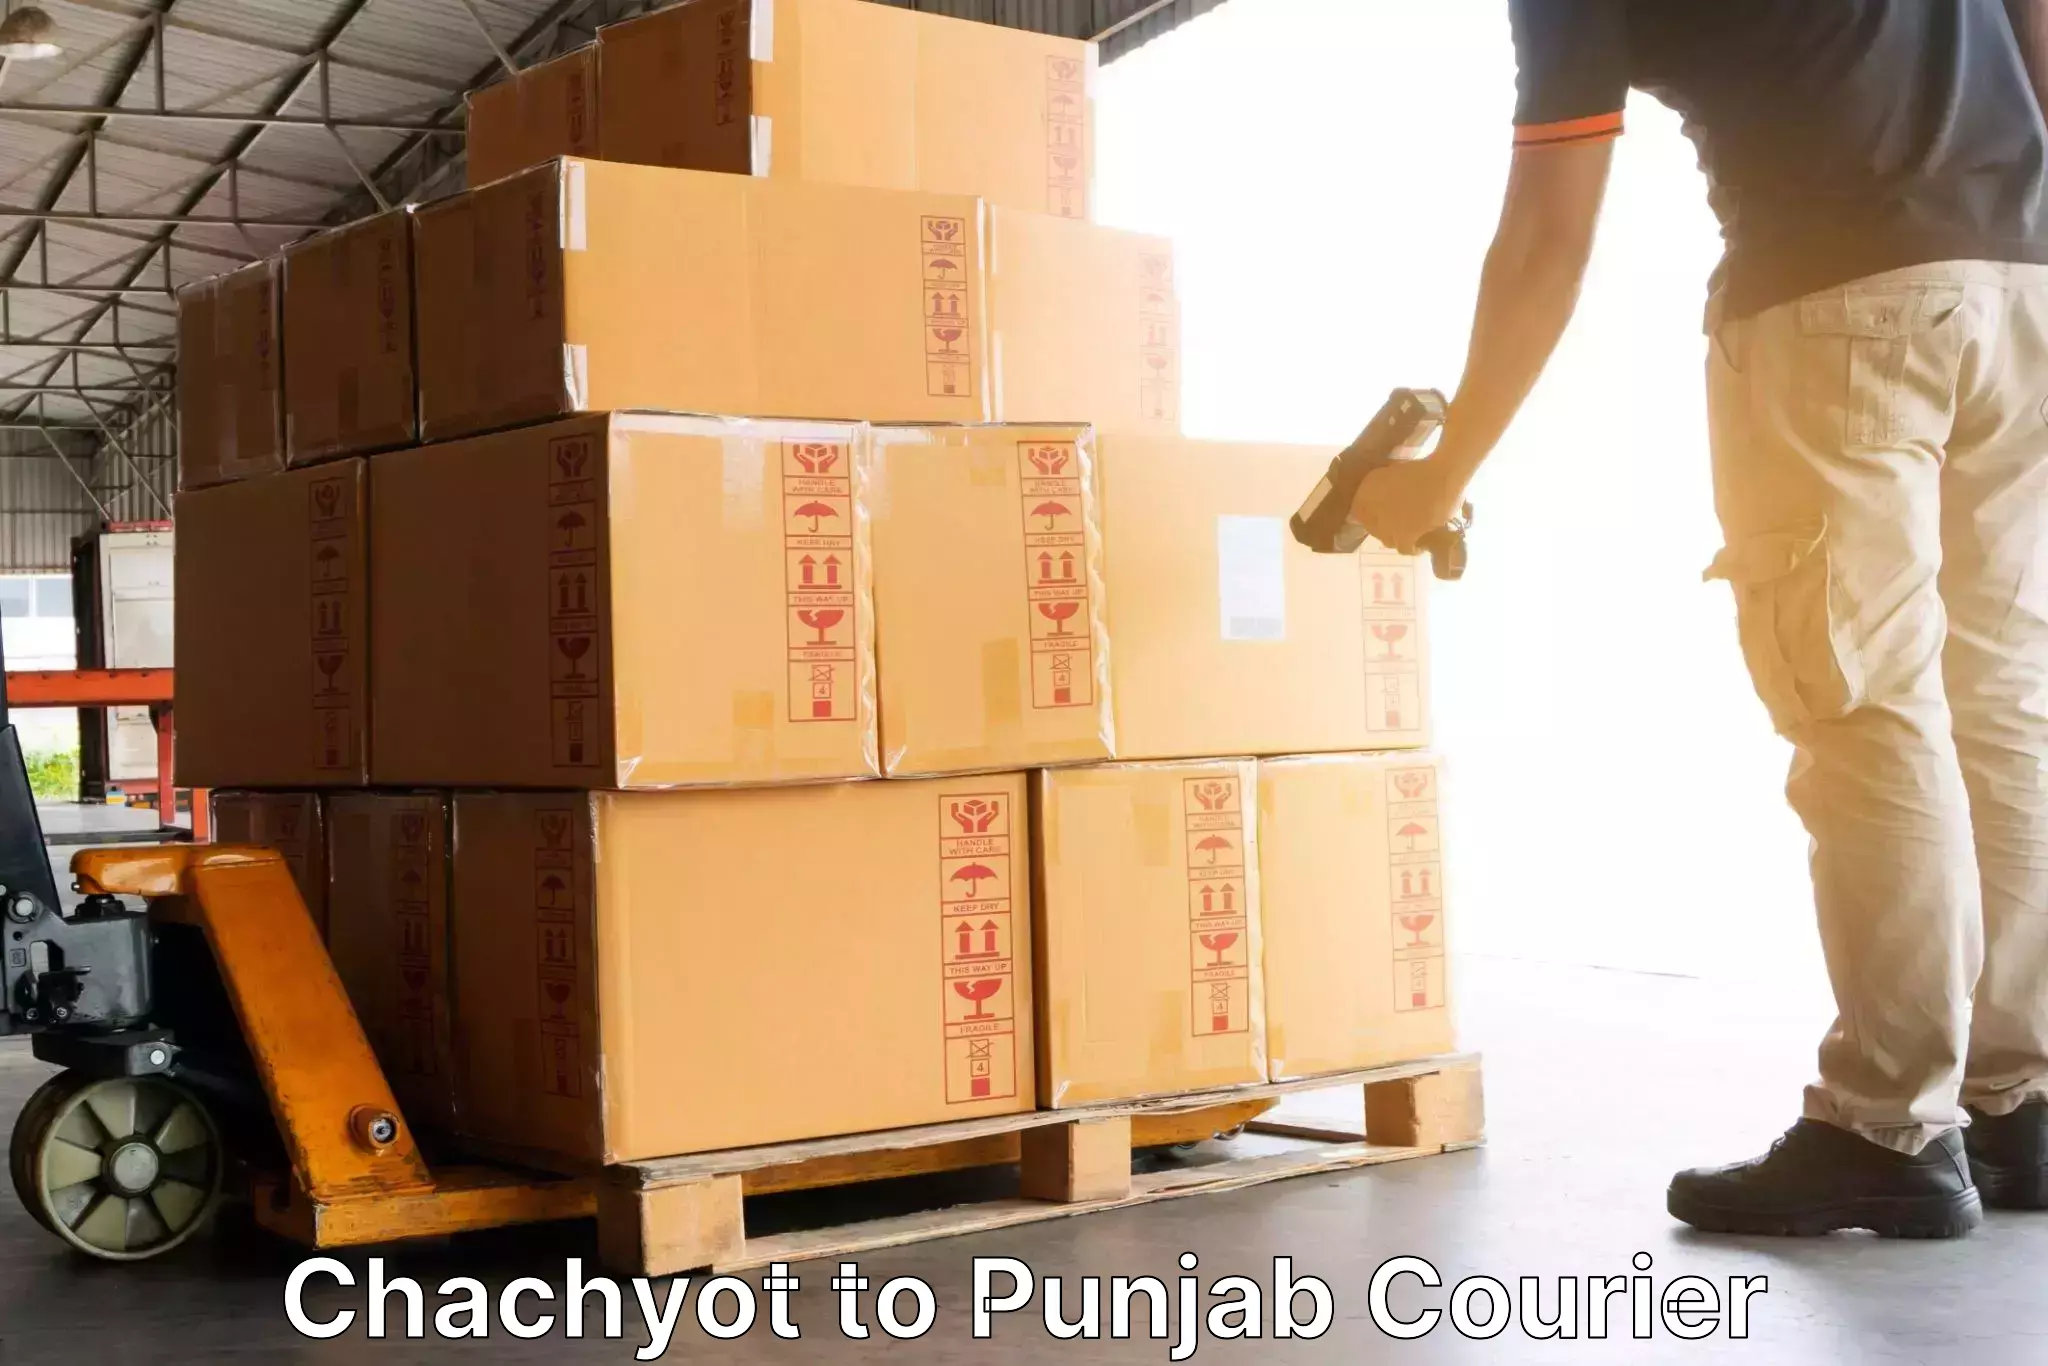 Courier rate comparison in Chachyot to Amritsar